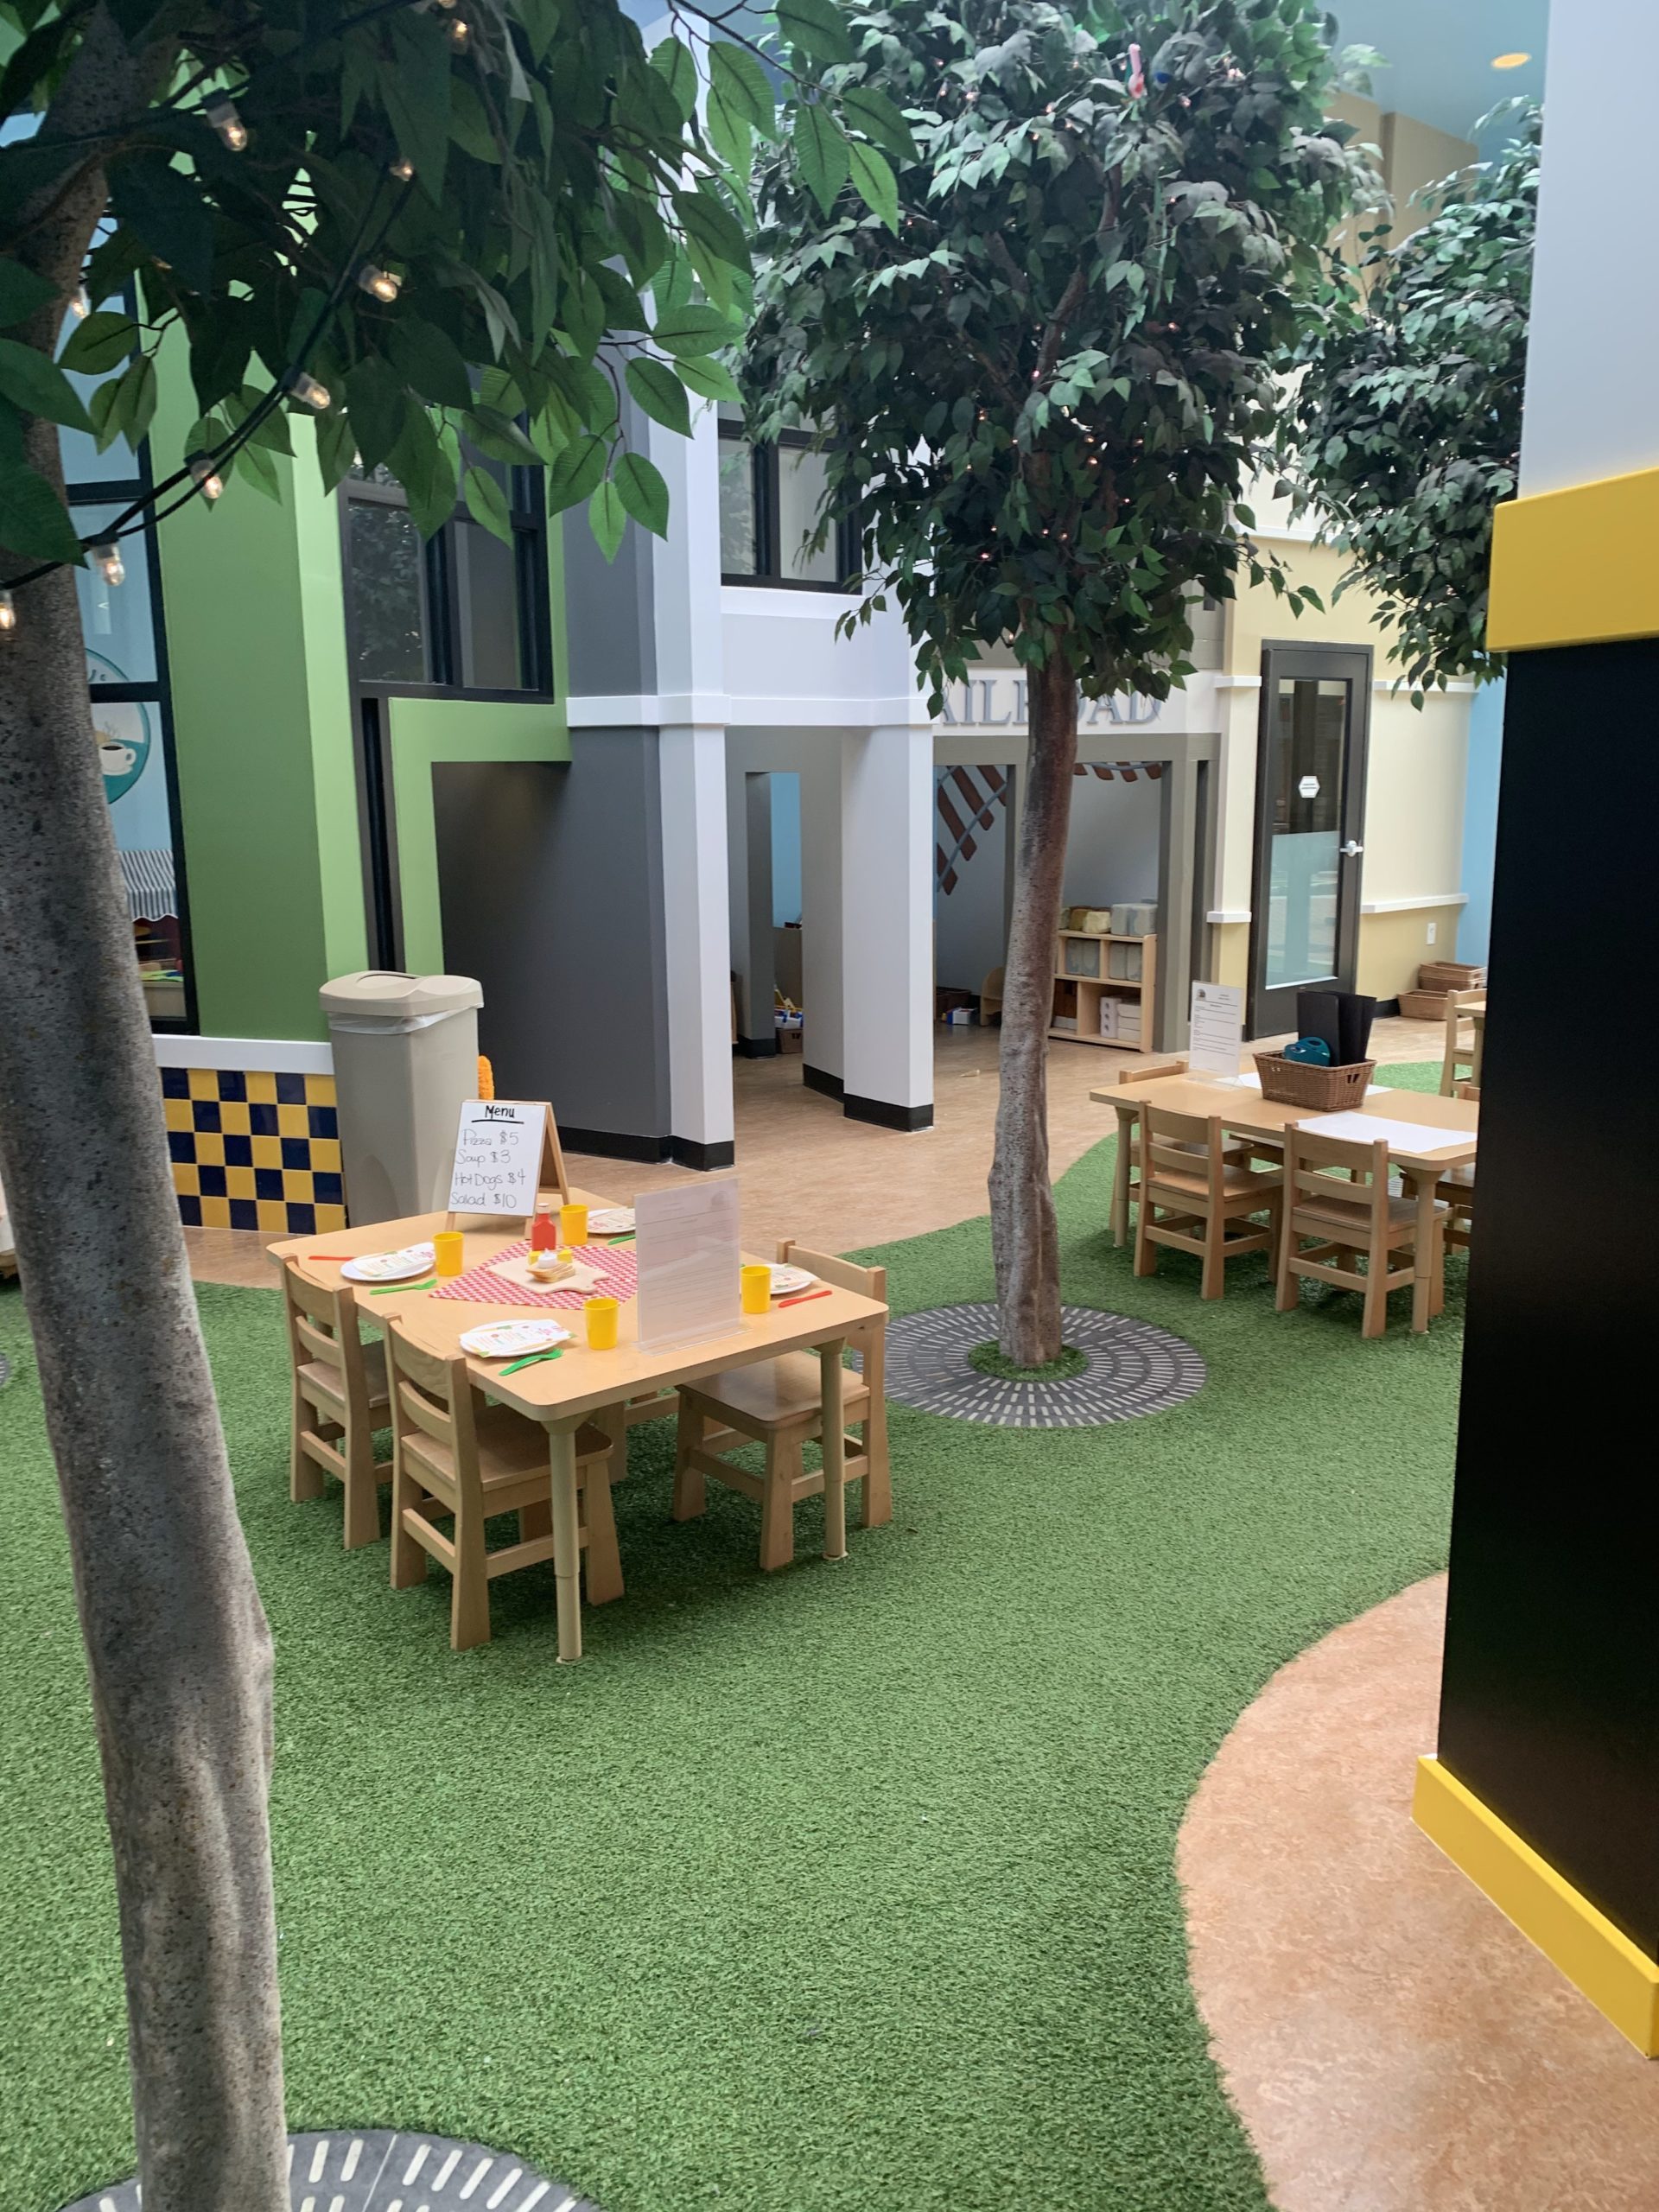 A child's eating area with fake grass and trees. 